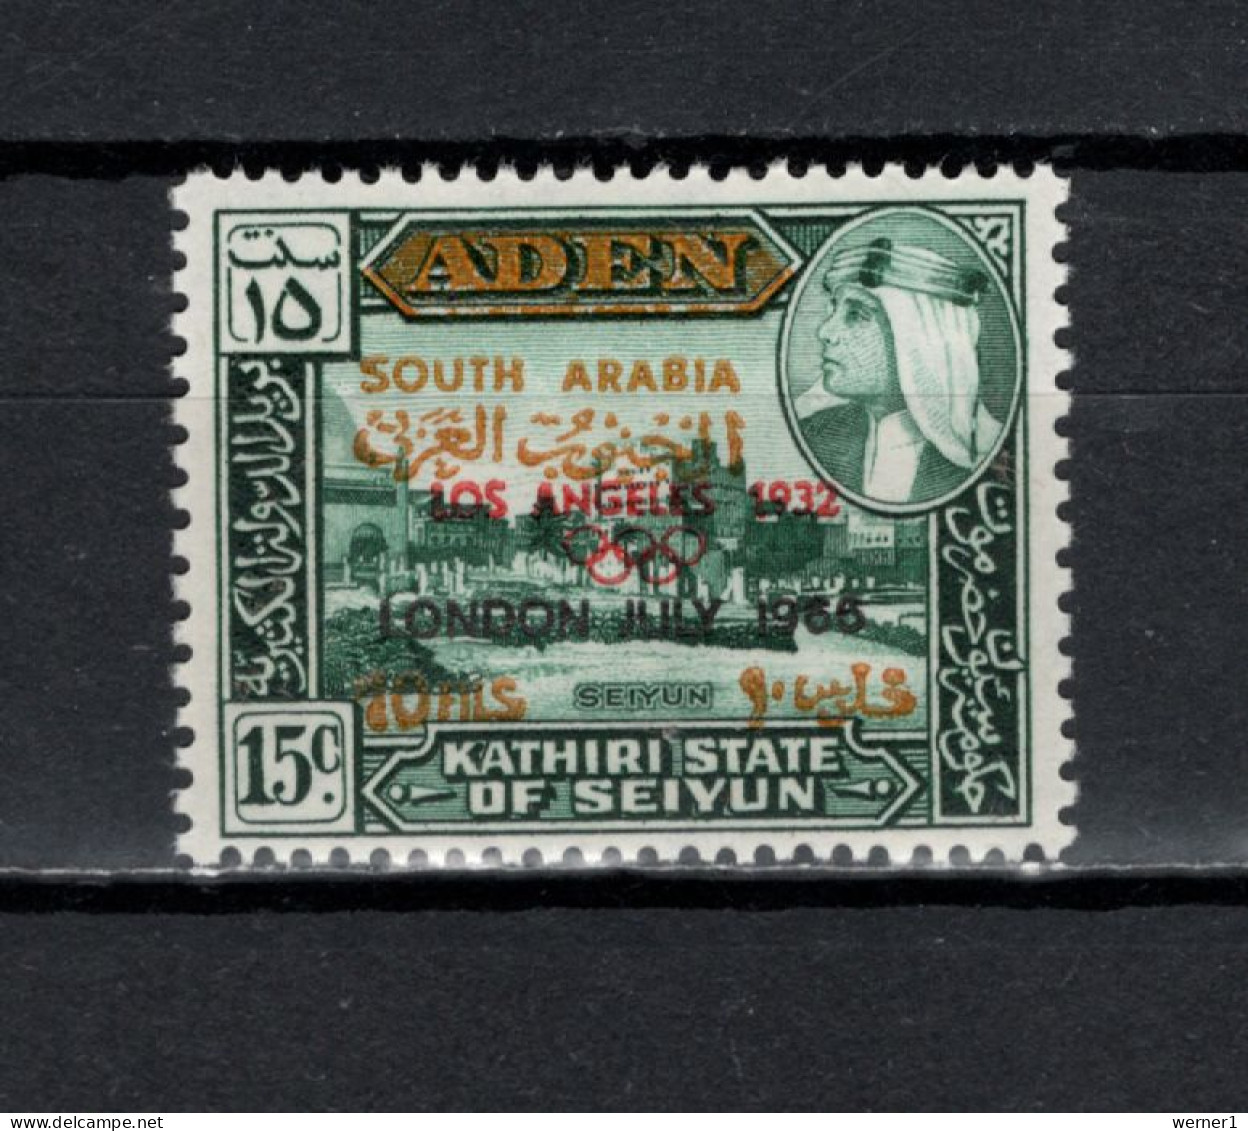 Aden - Kathiri State Of Seiyun 1966 Football Soccer World Cup Stamp With Black O/p "LONDON JULY 1966" MNH -scarce- - 1966 – Inghilterra